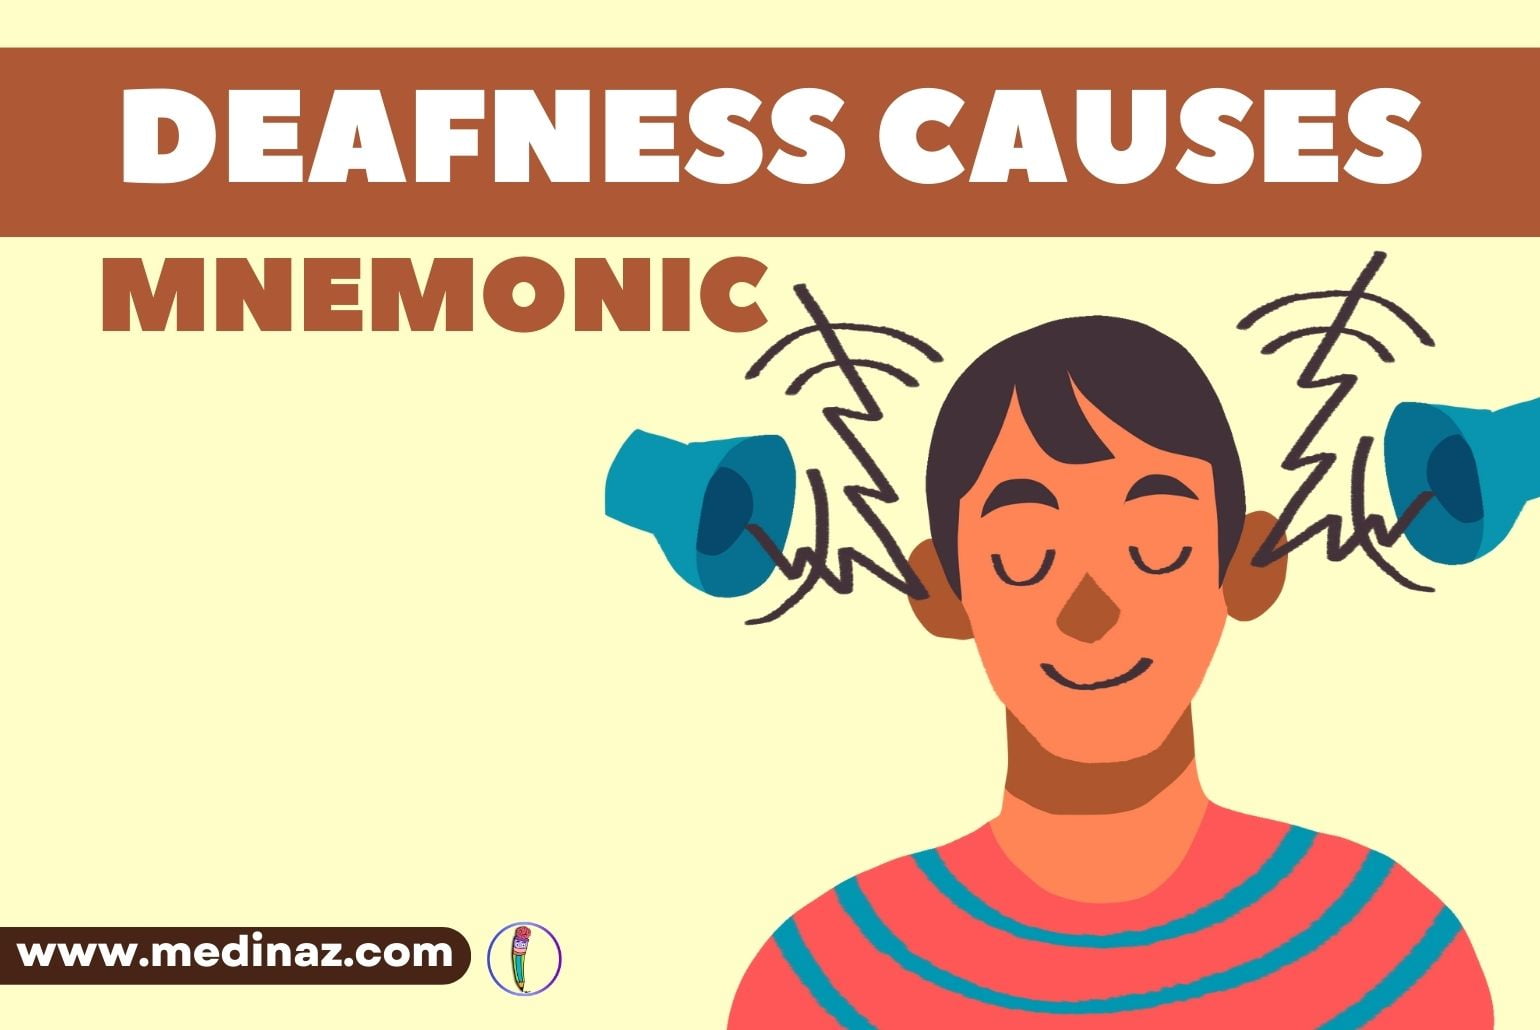 Causes of deafness mnemonic